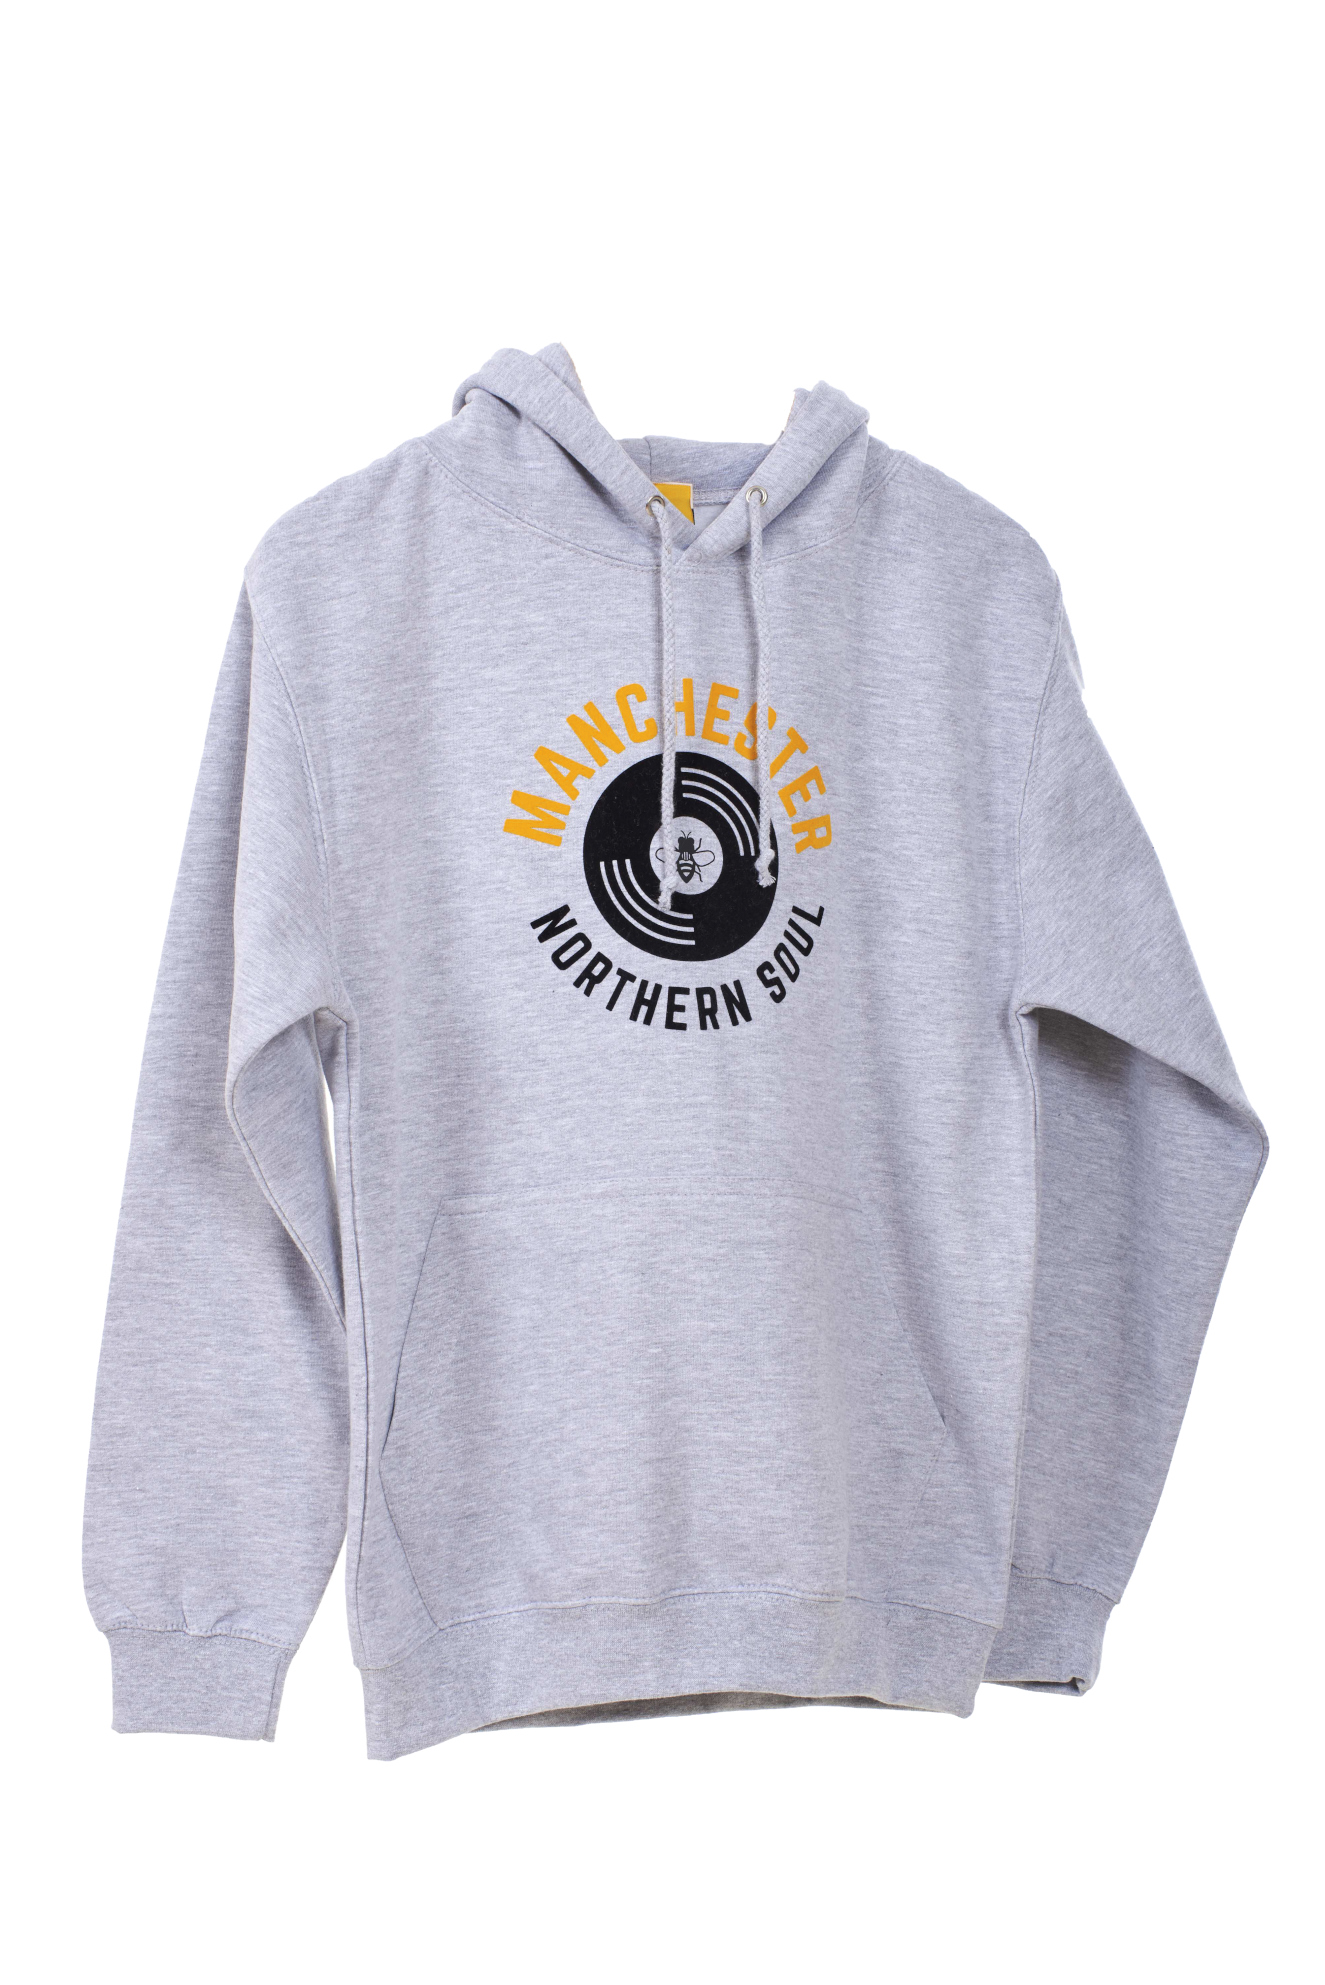 Northern Soul Hoodie - Manchester Souvenirs